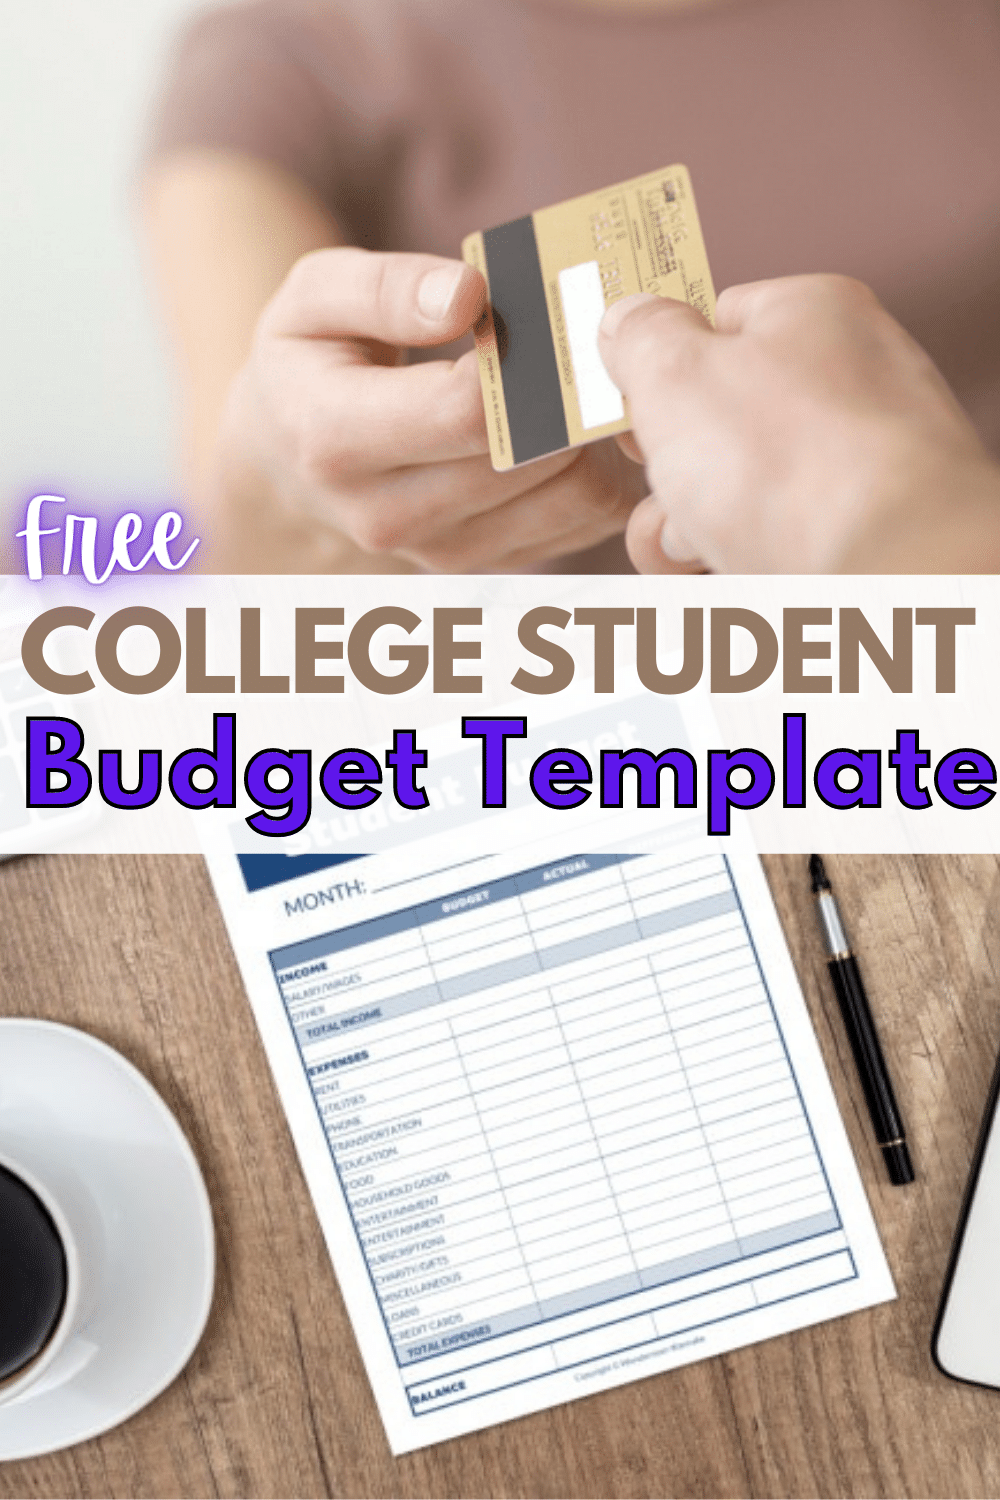 budgeting apps free